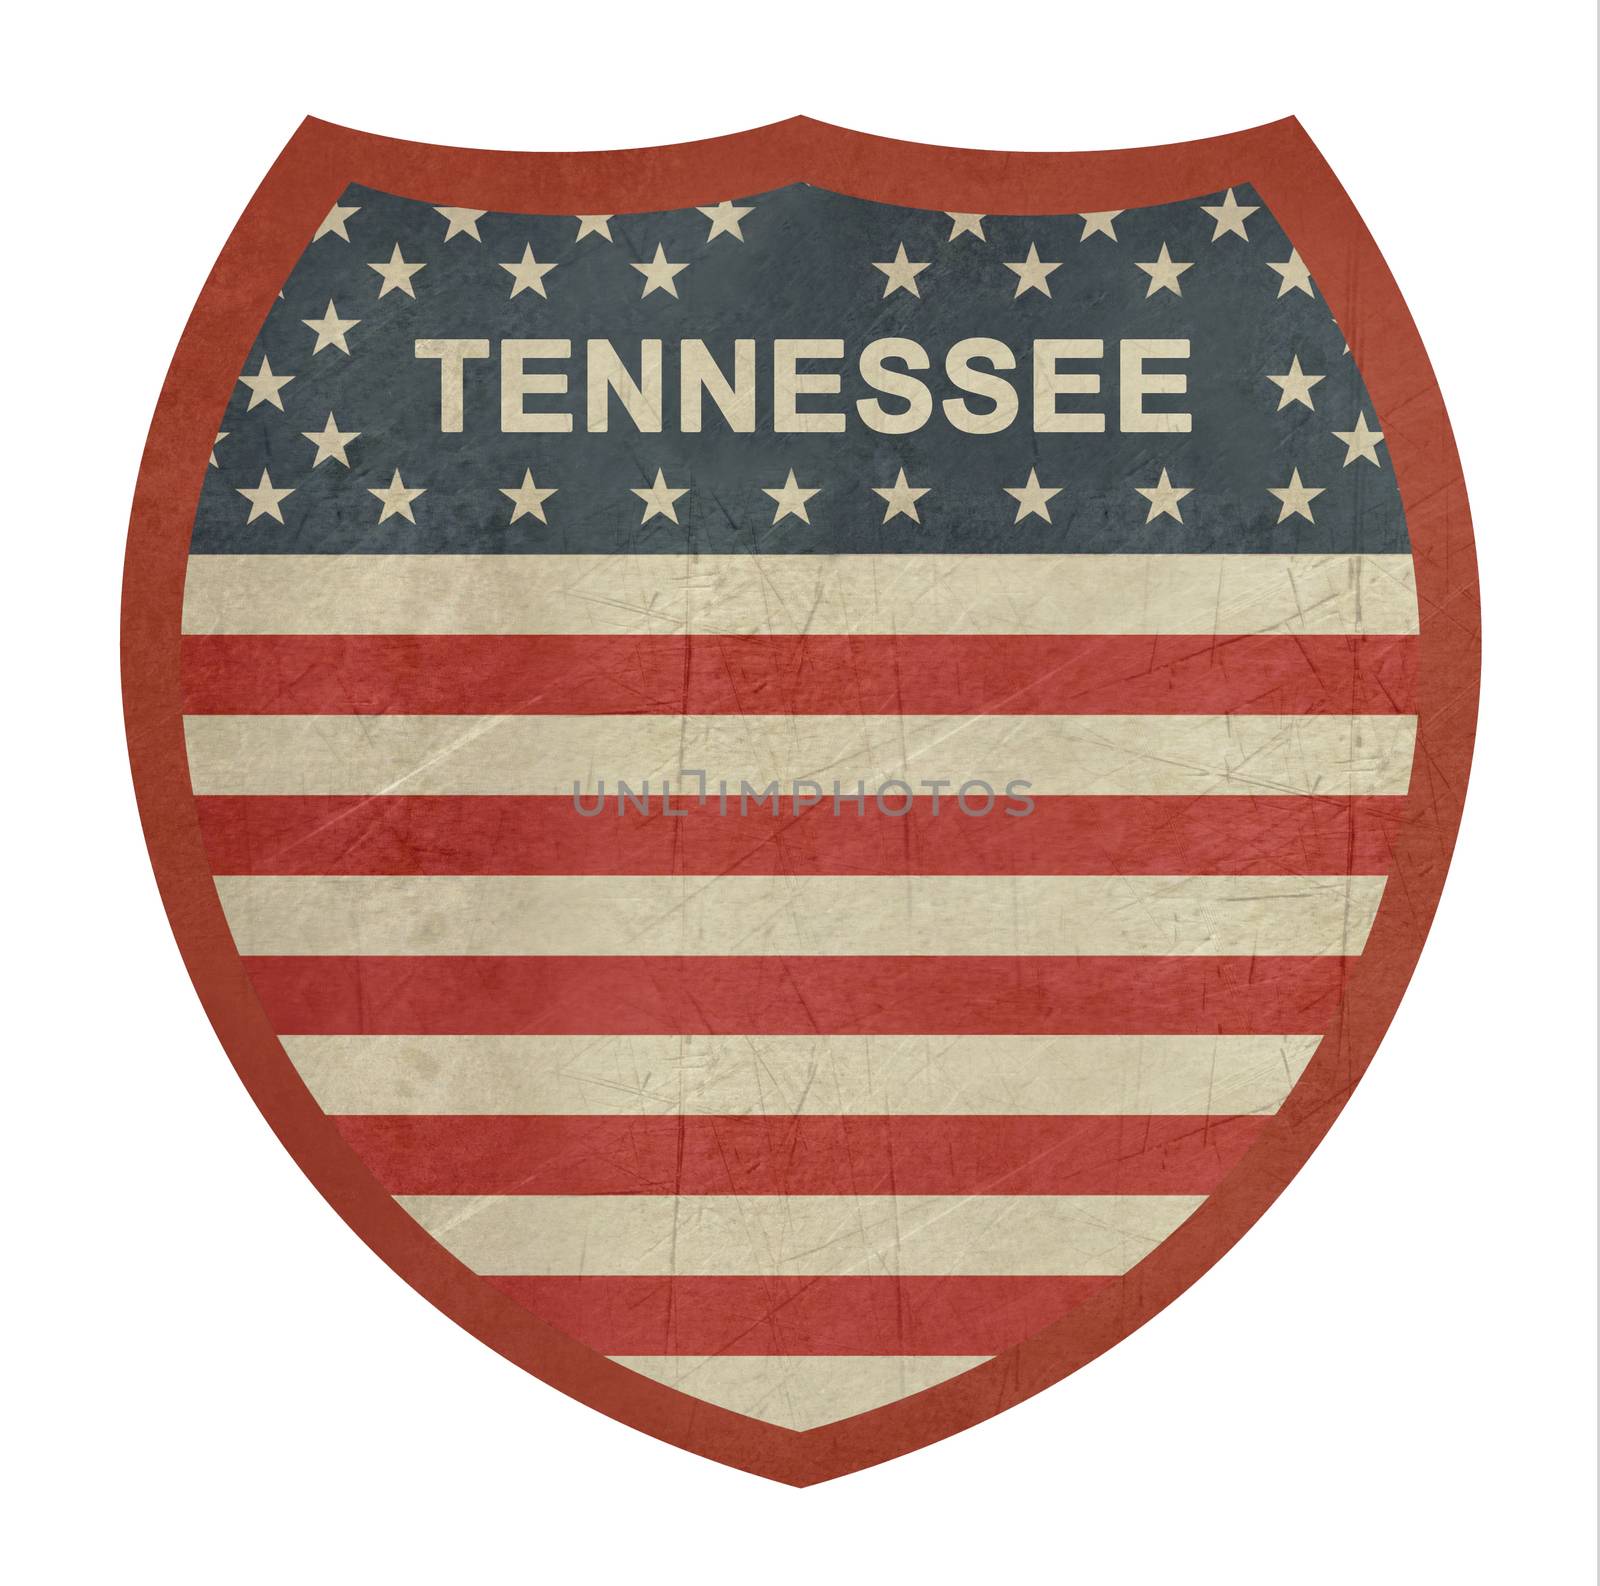 Grunge Tennessee American interstate highway sign isolated on a white background.